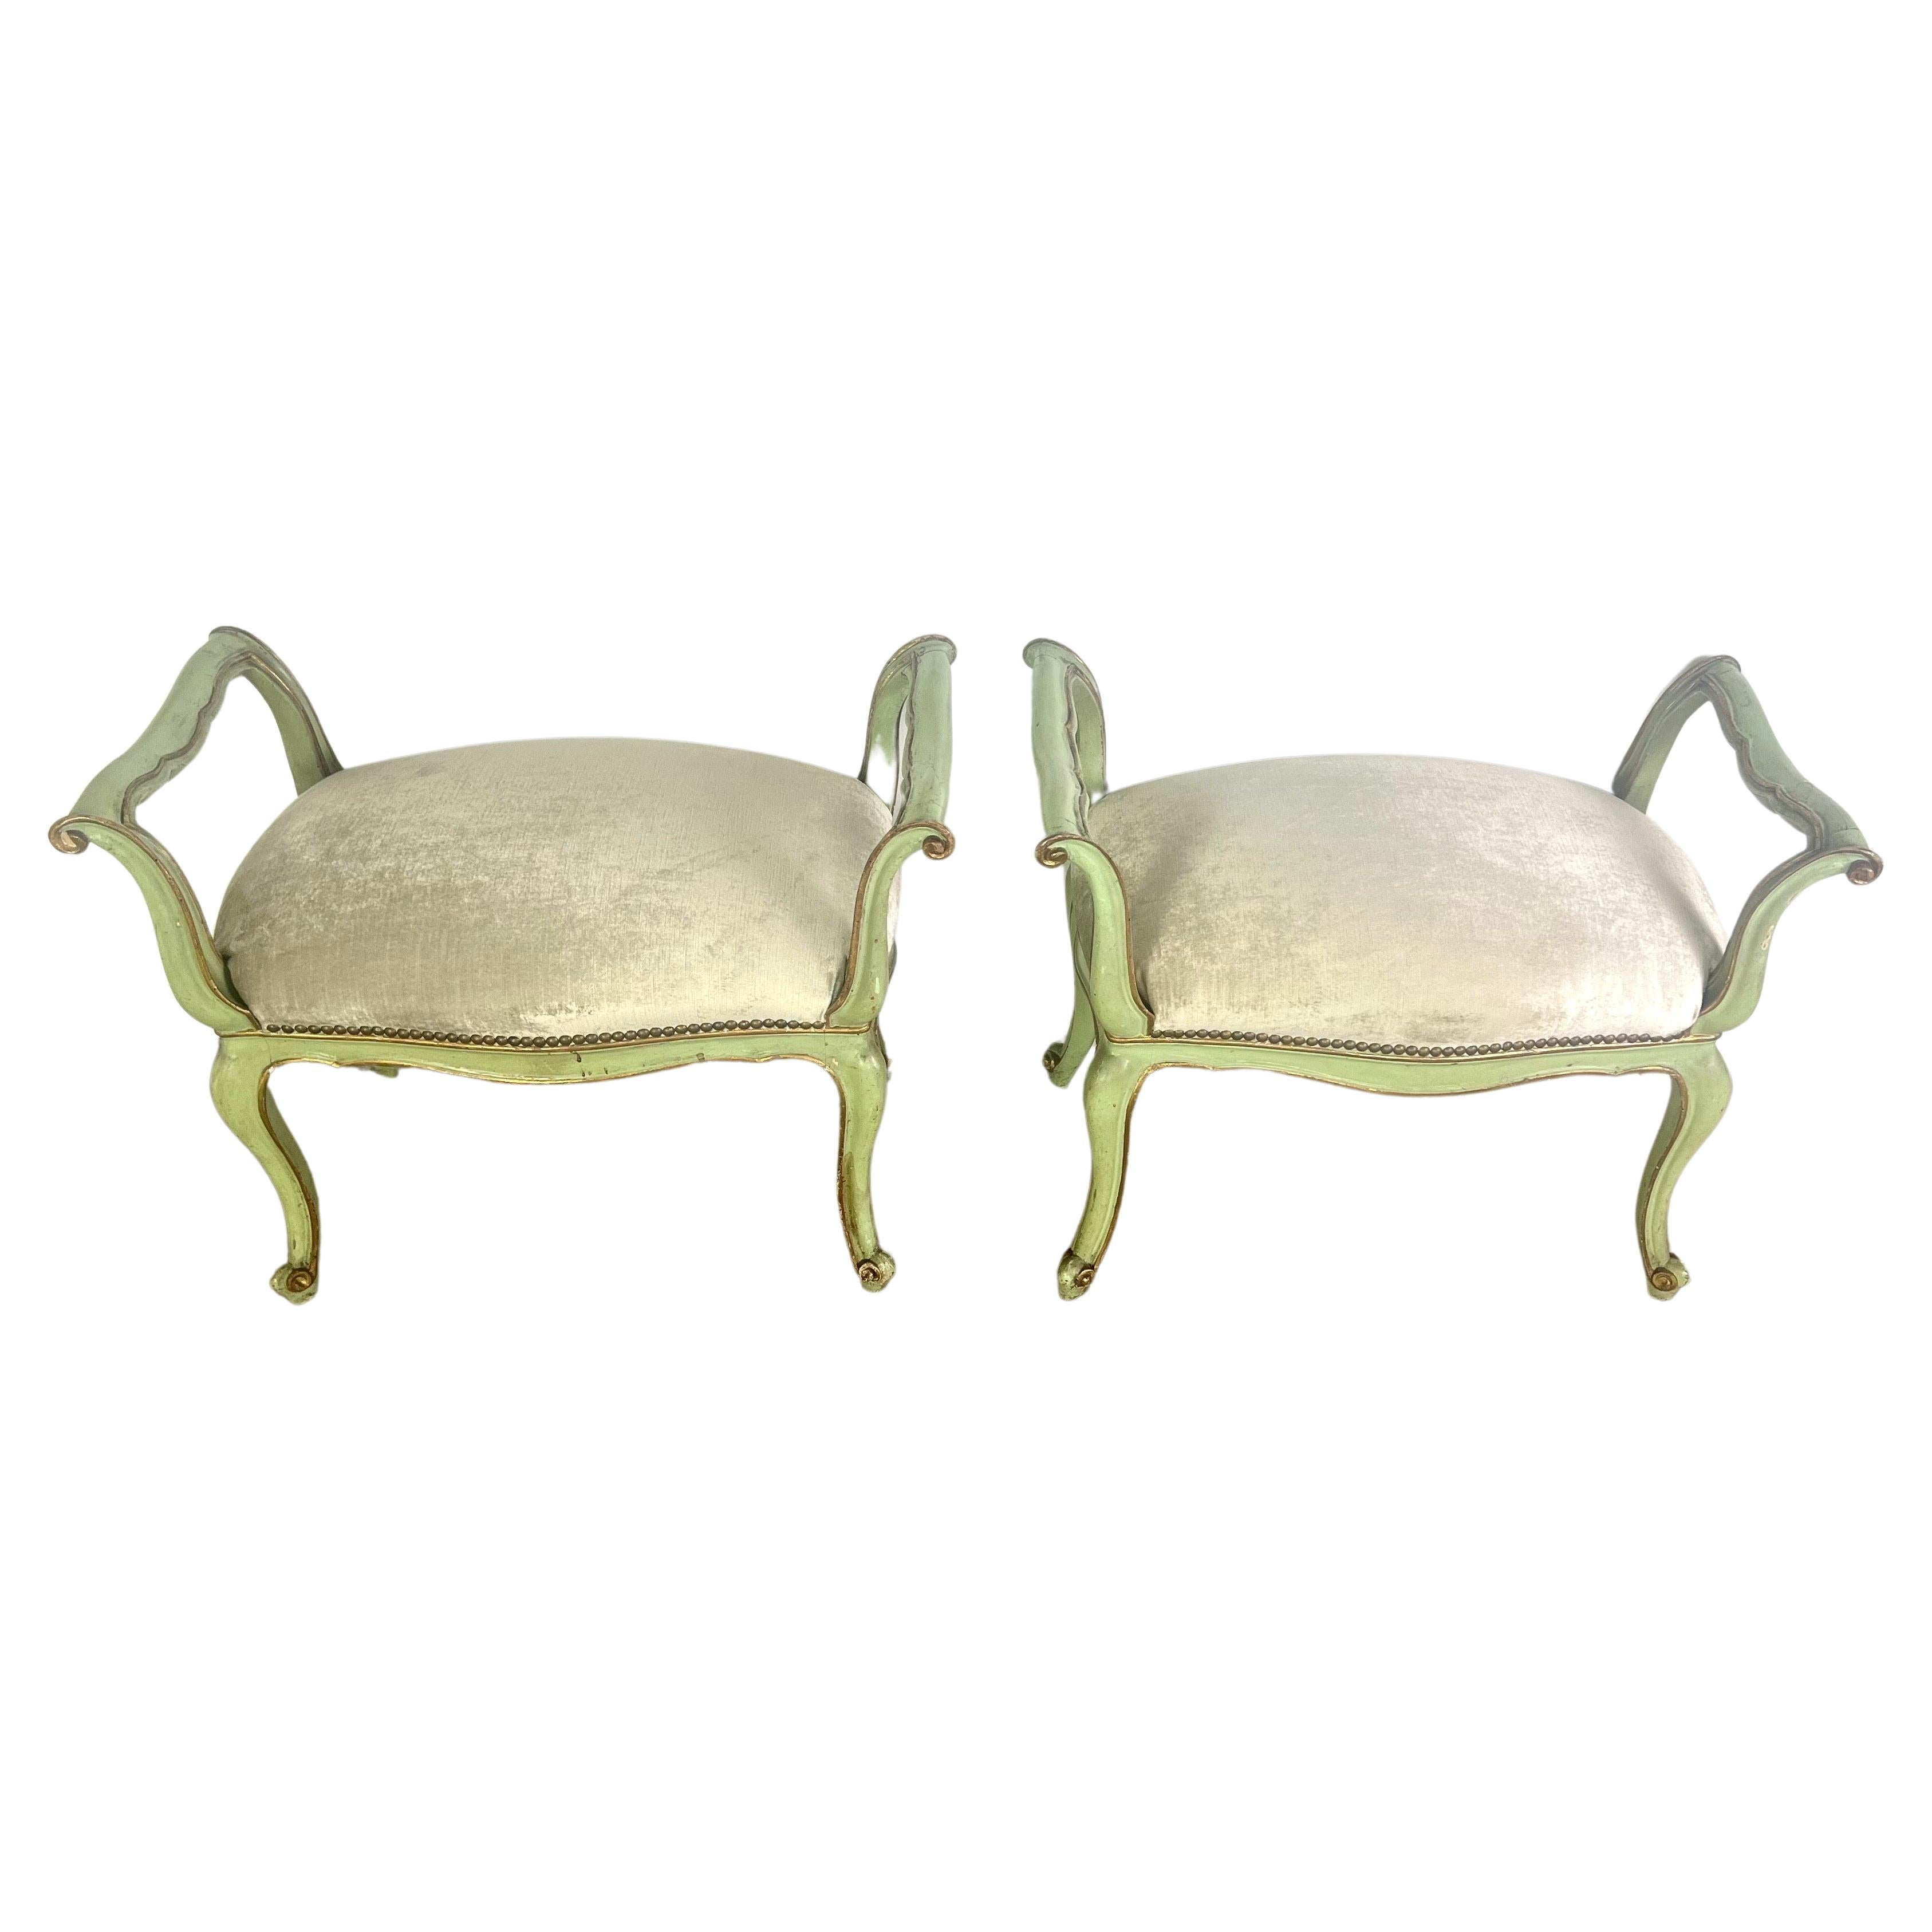 This pair of 1930's Louis XV style French benches is a charming representation of the period's elegance and artful design.  The pistachio green paint on the wood frames adds a fresh, vibrant touch to the classic form, lending the benches a cheerful